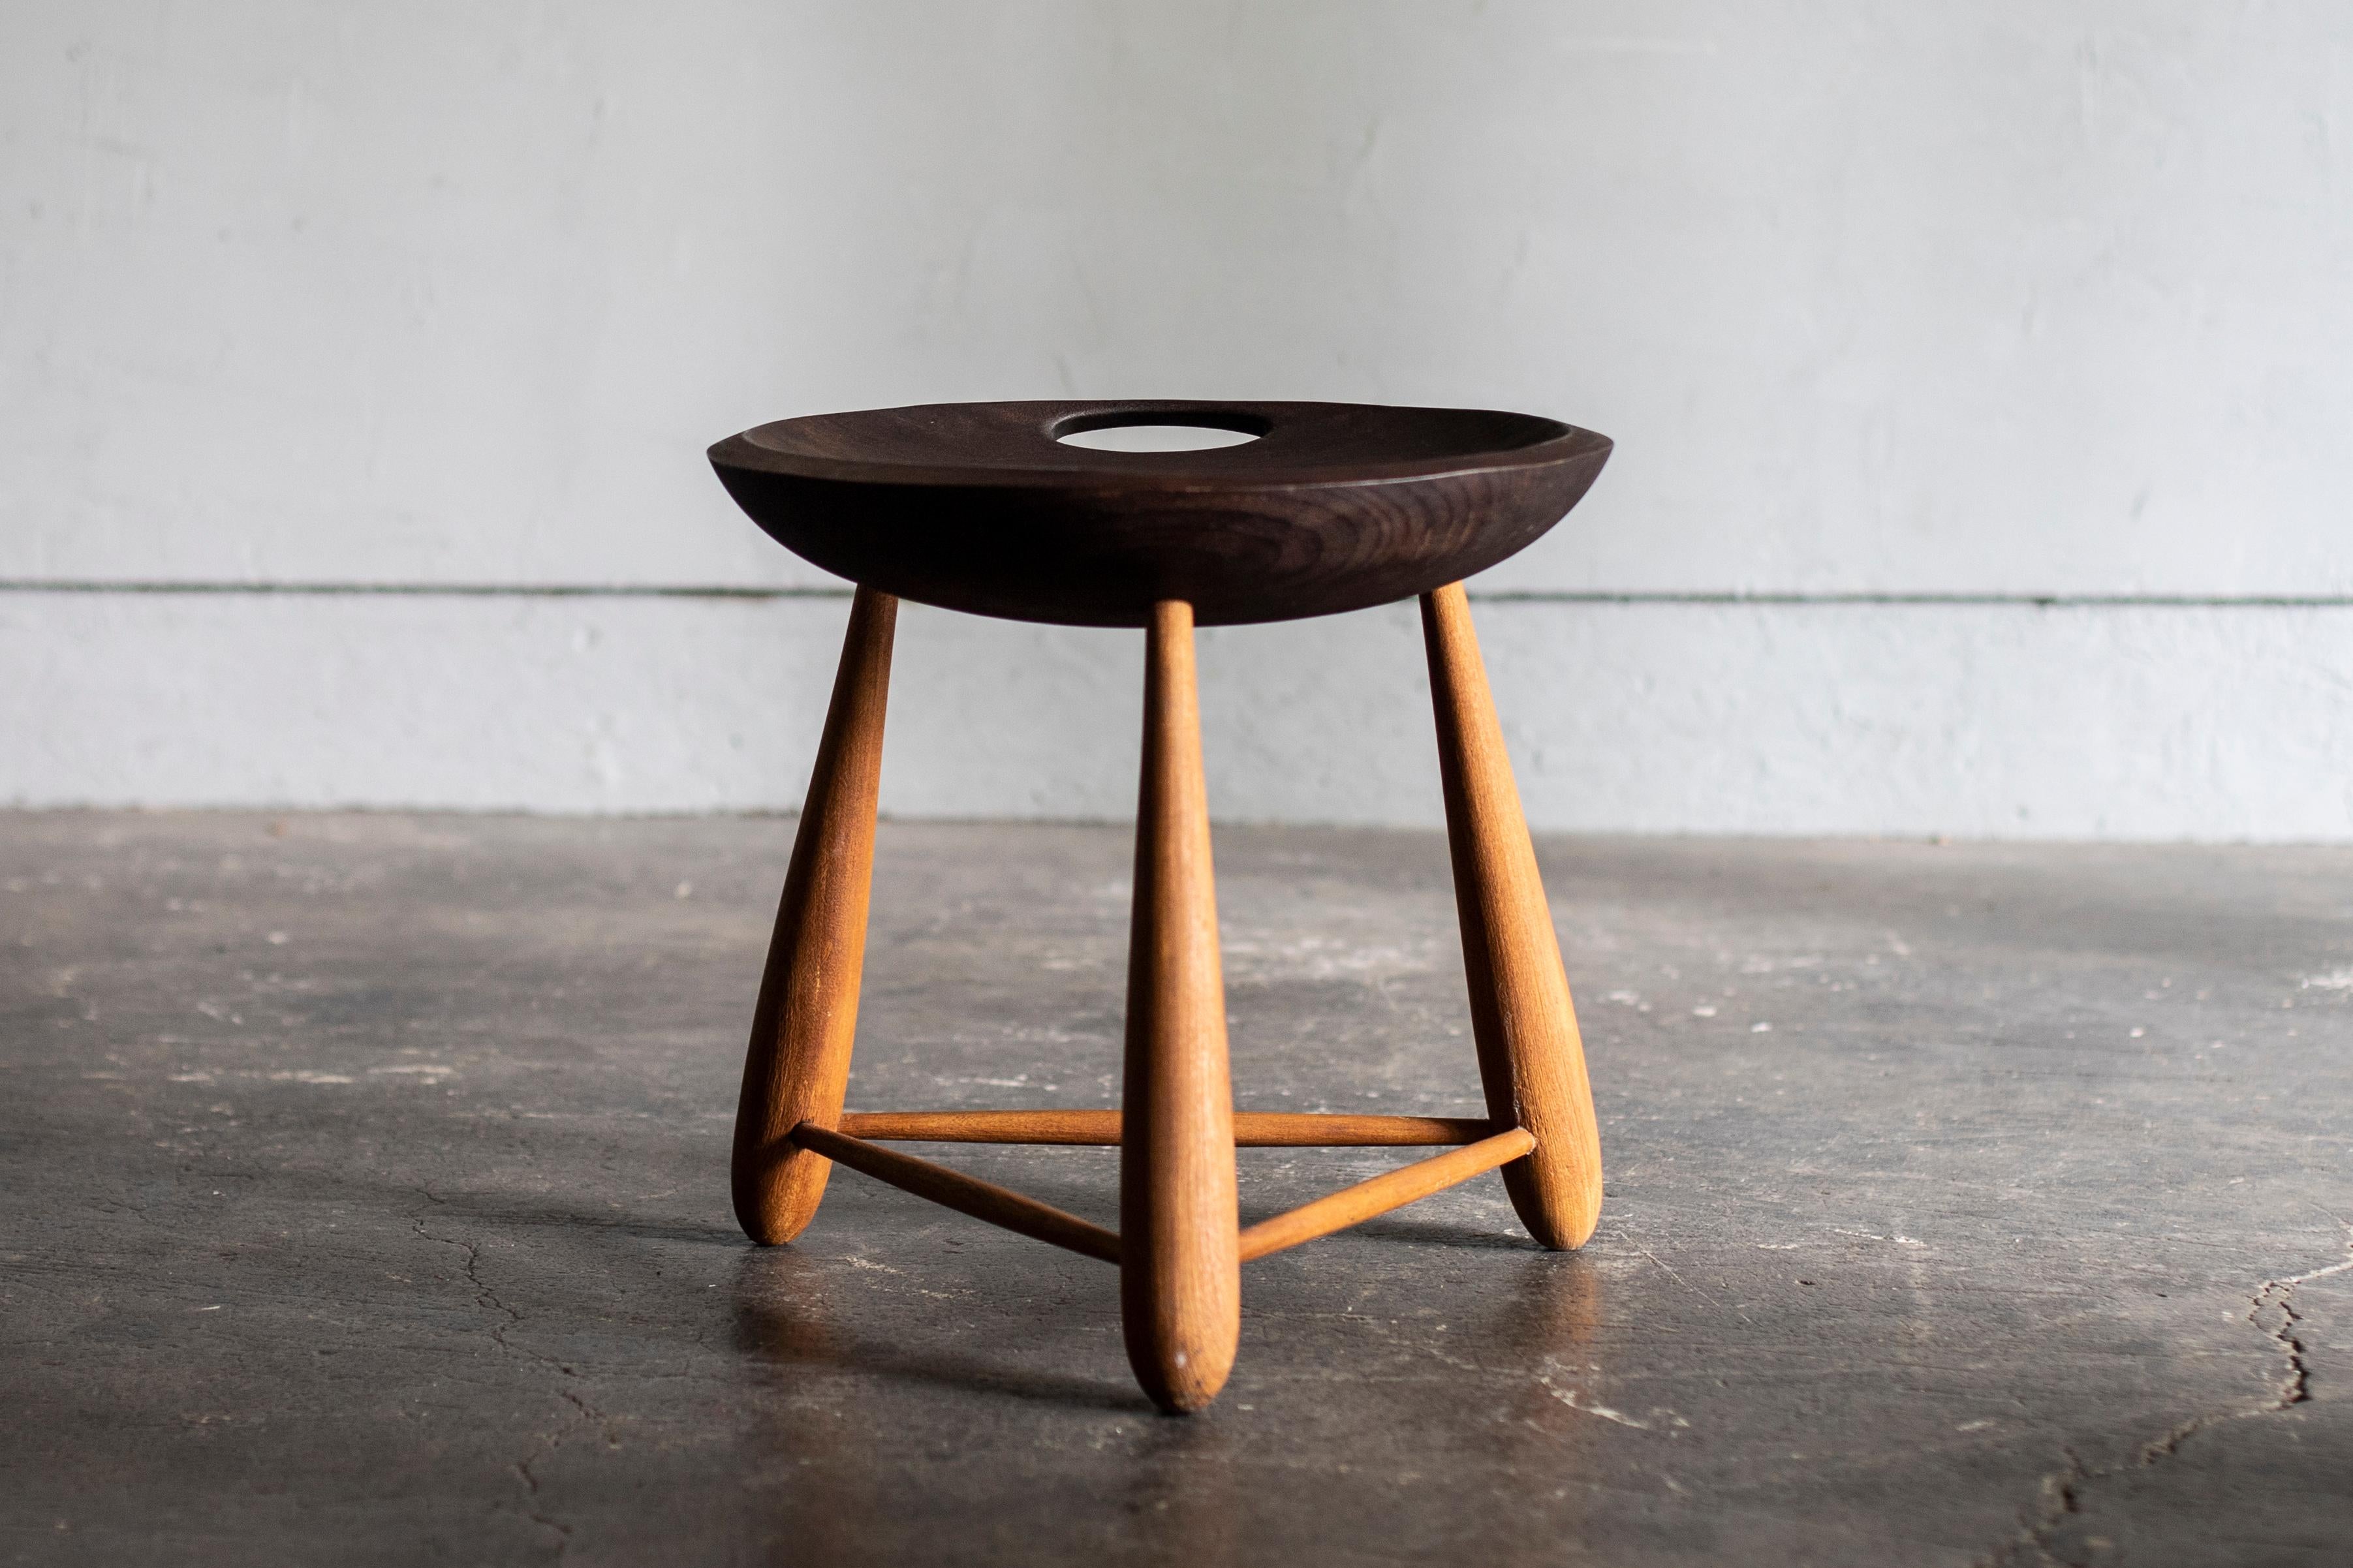 'Mocho' stool designed by Sergio Rodrigues in 1954.
One of the most iconic and important designs of Brazilian midcentury furniture.
Sergio Rodrigues was inspired by traditional milking stools with one leg and the people who used it, so that this